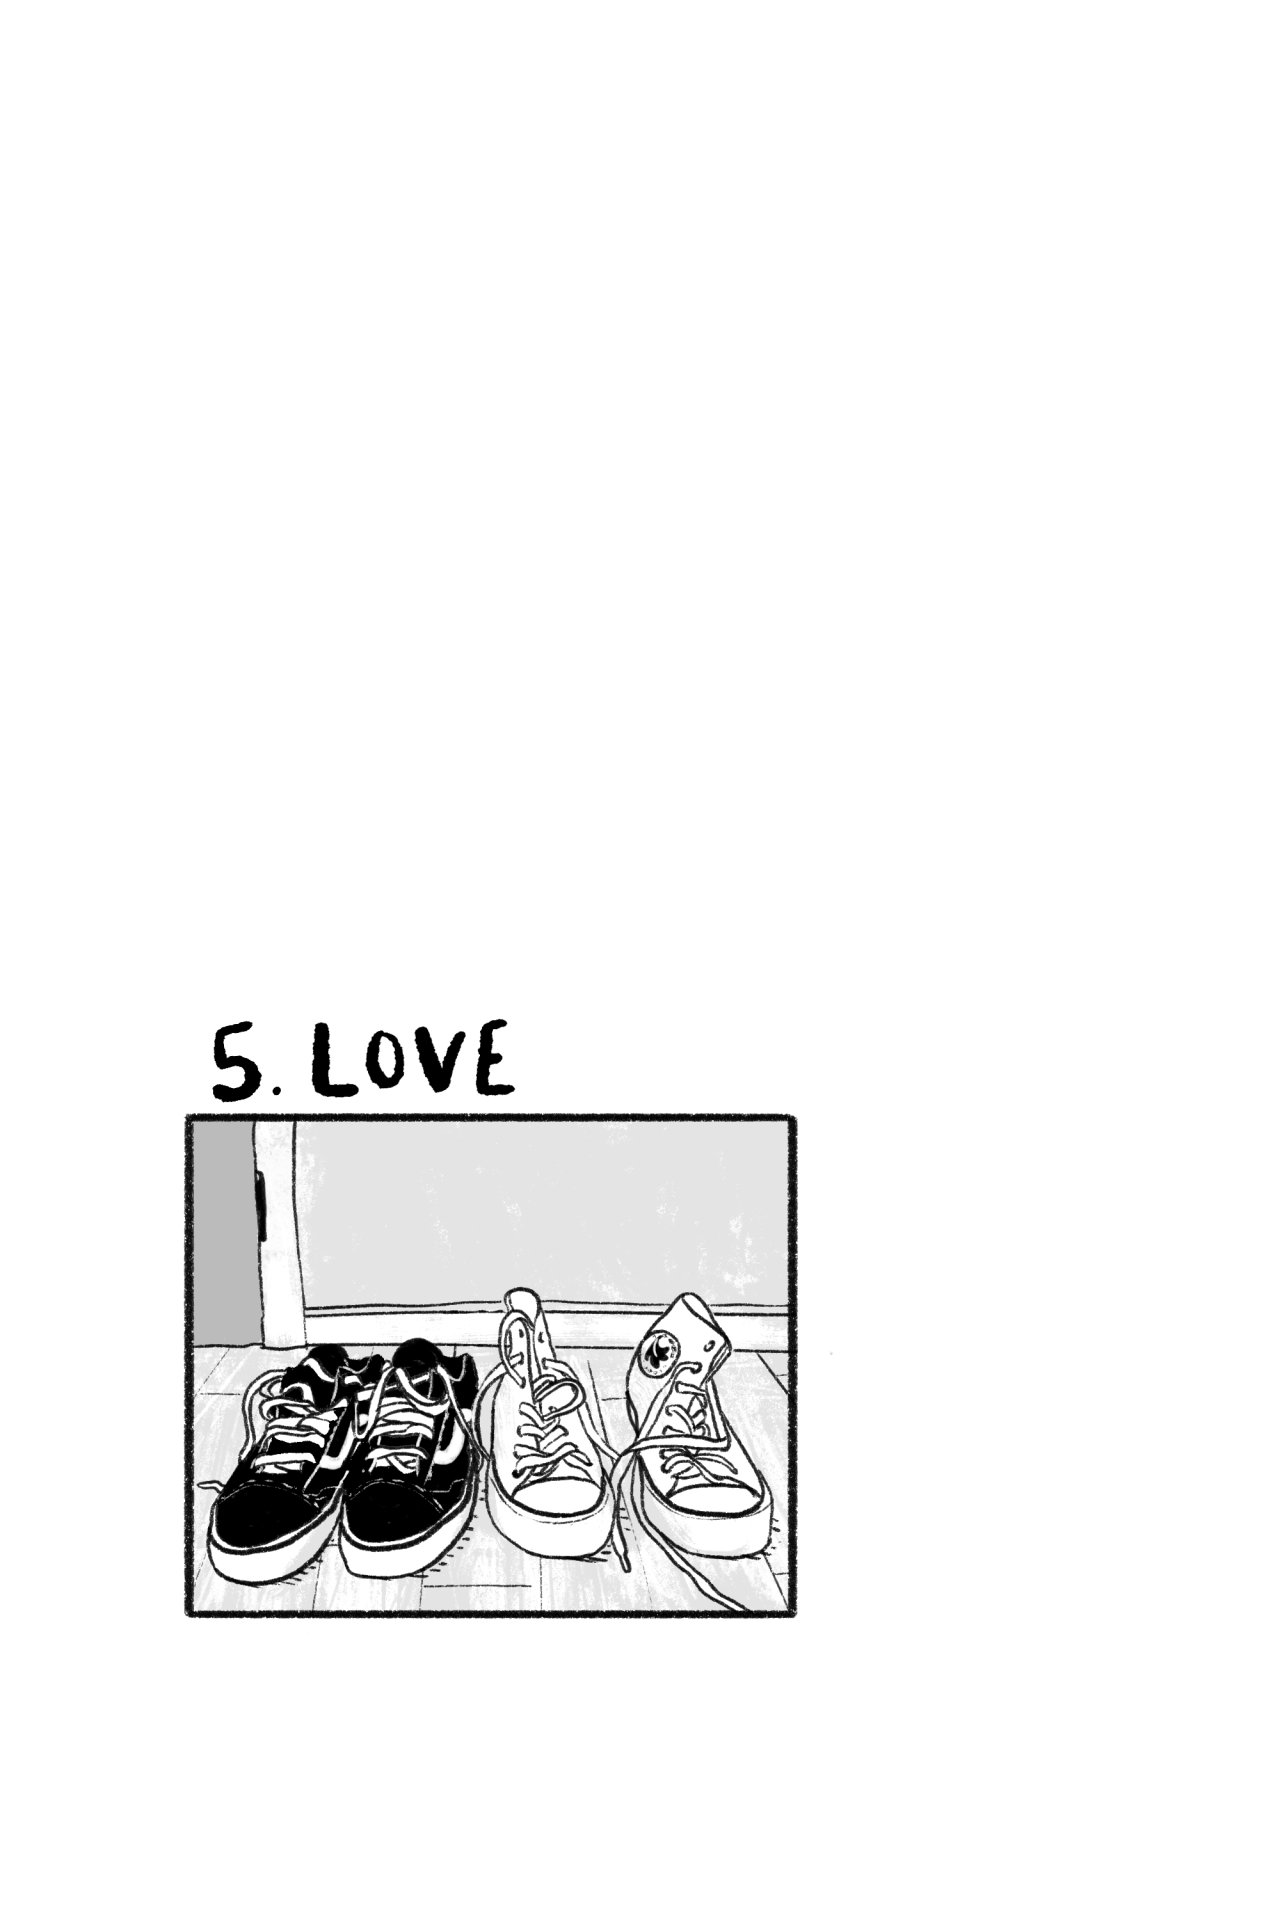 HEARTSTOPPER — chapter 5-16 family drama…read from the beginning